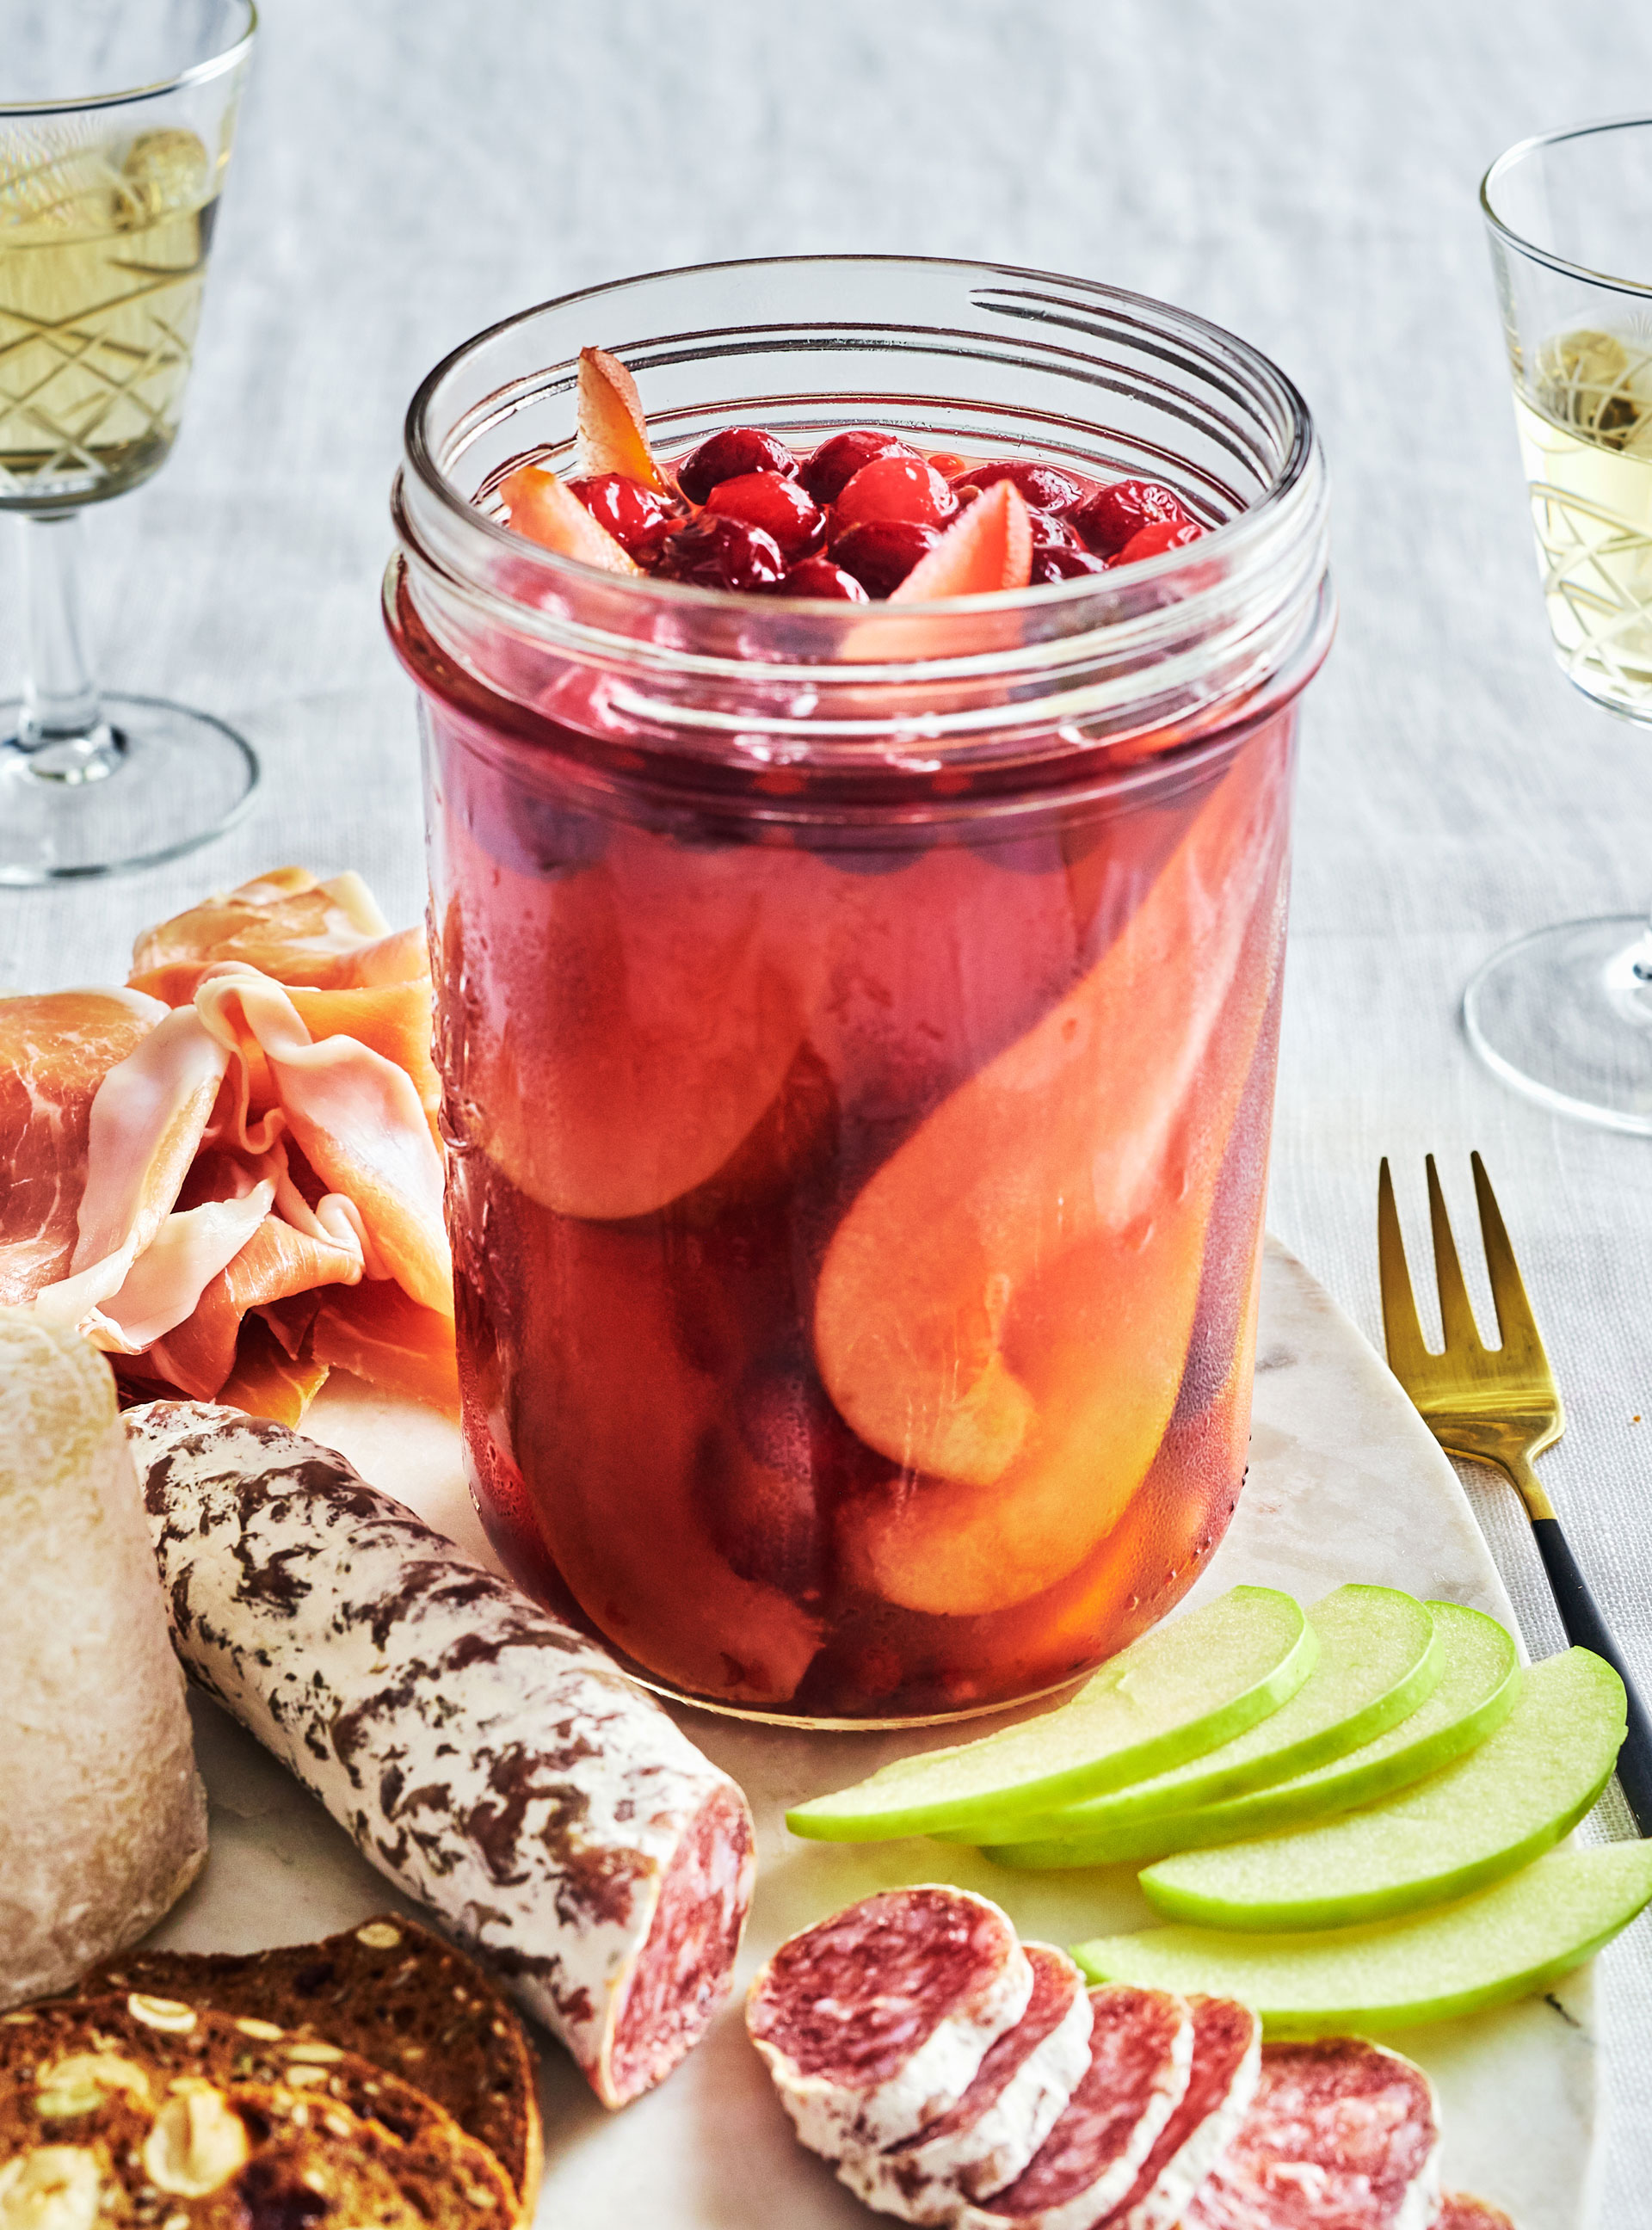 Pickled Pears and Cranberries